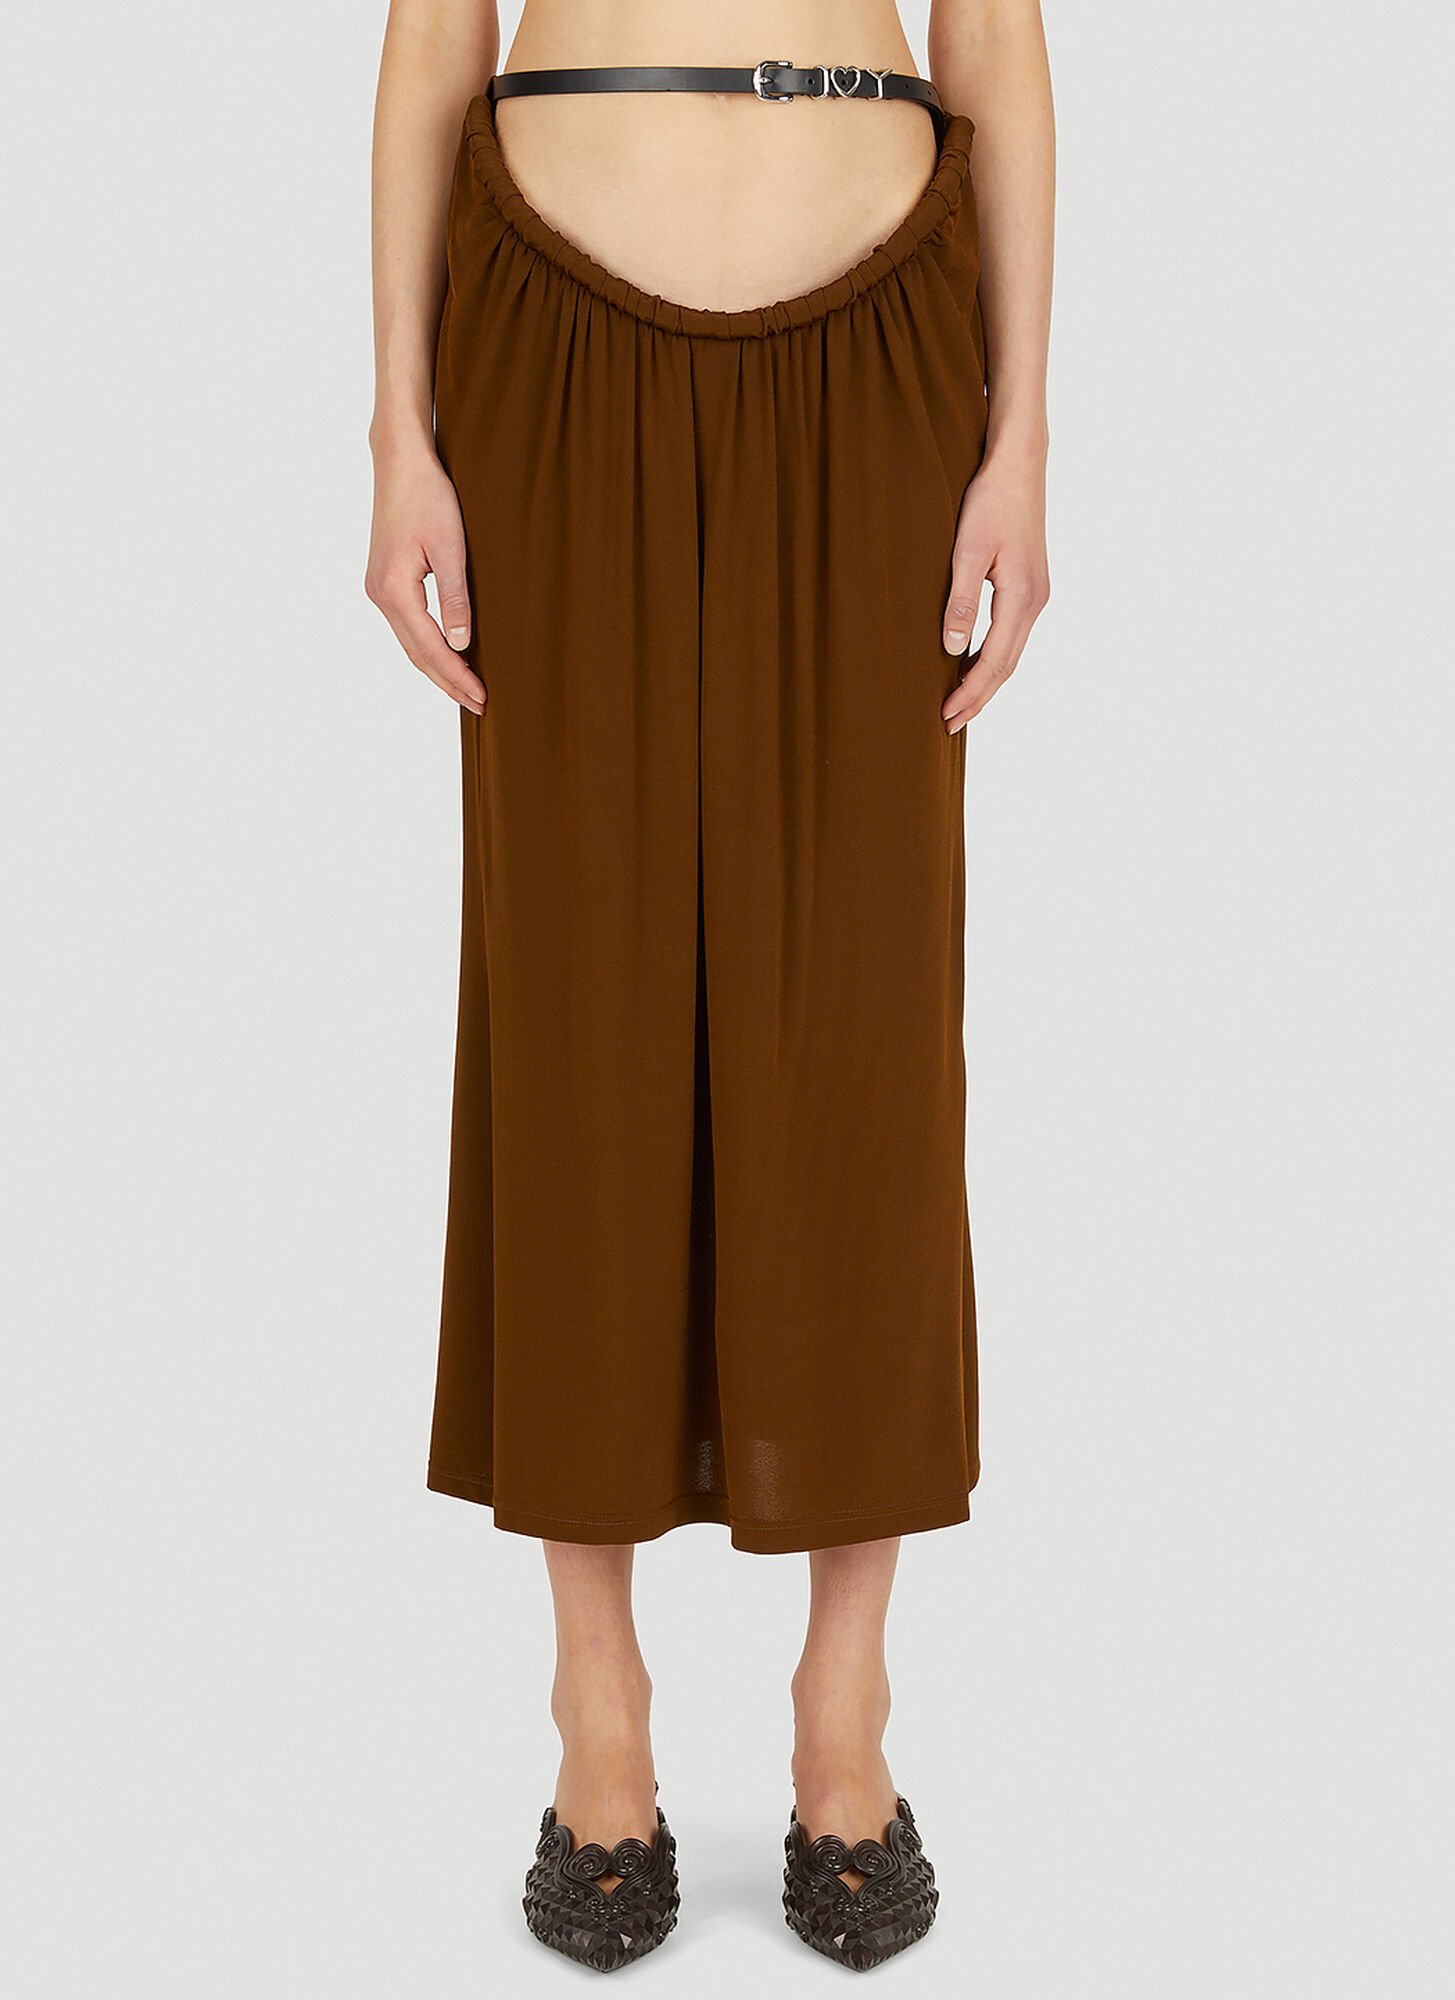 Y/project Belted Arc Skirt